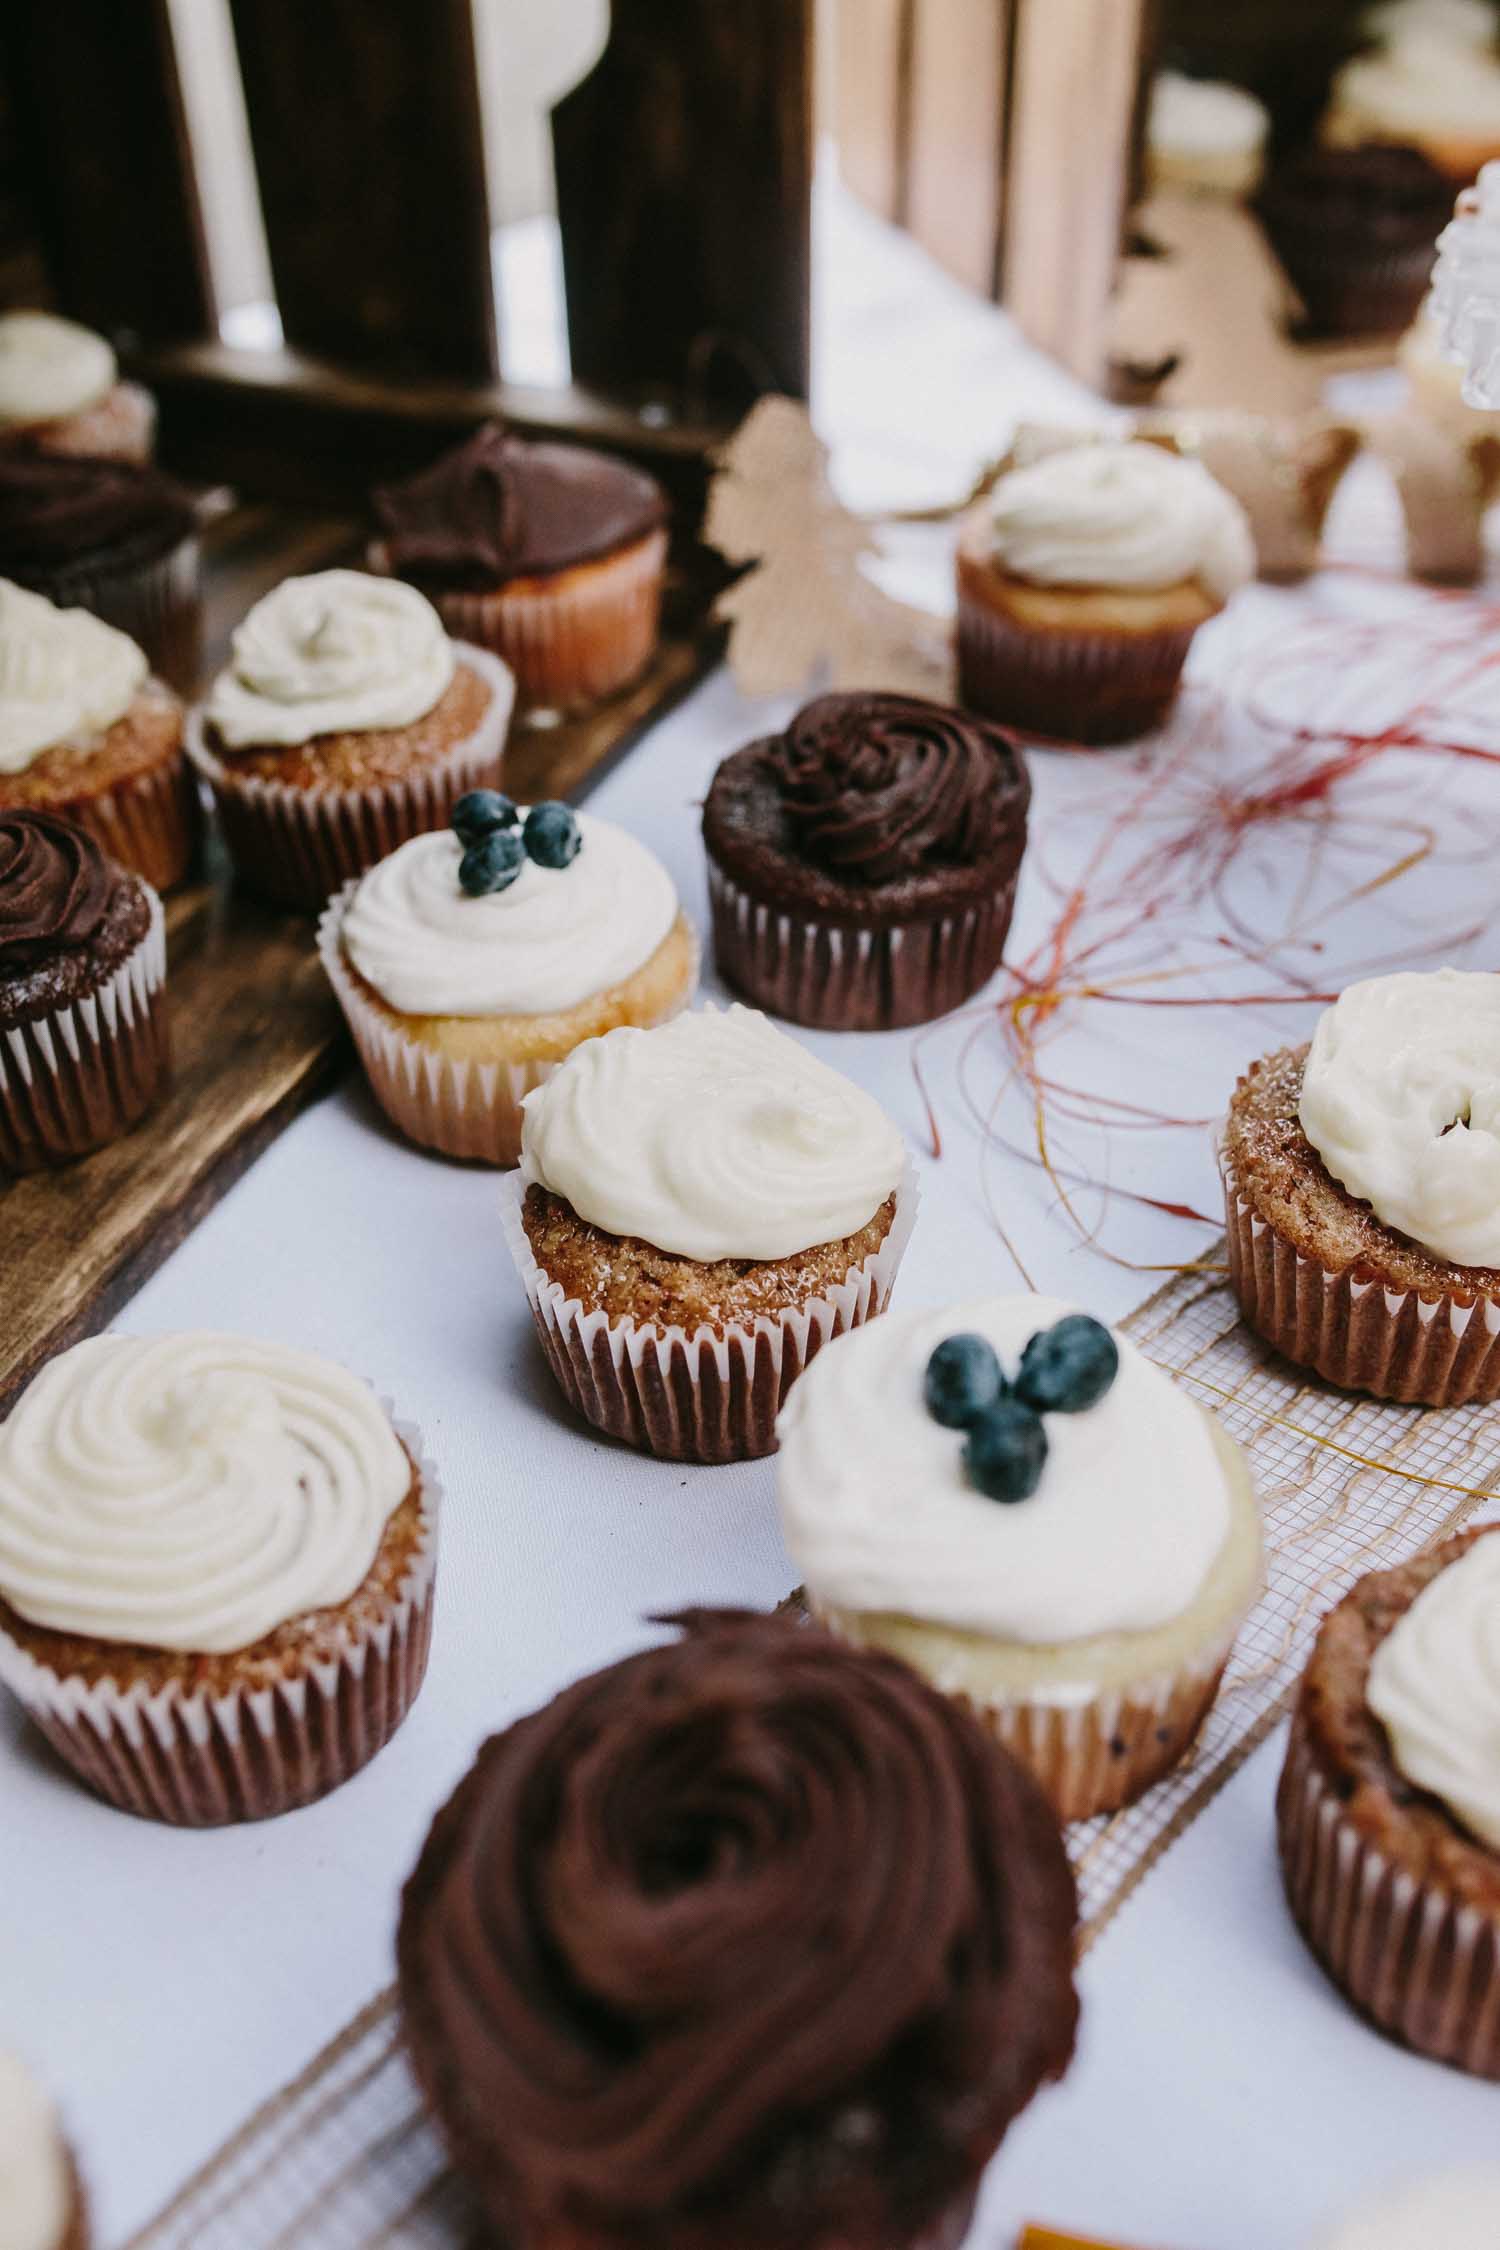 Close up on a display of cupcakes. Some have chocolate frosting, some have vanilla frosting, and some of the vanilla have blueberries on top.